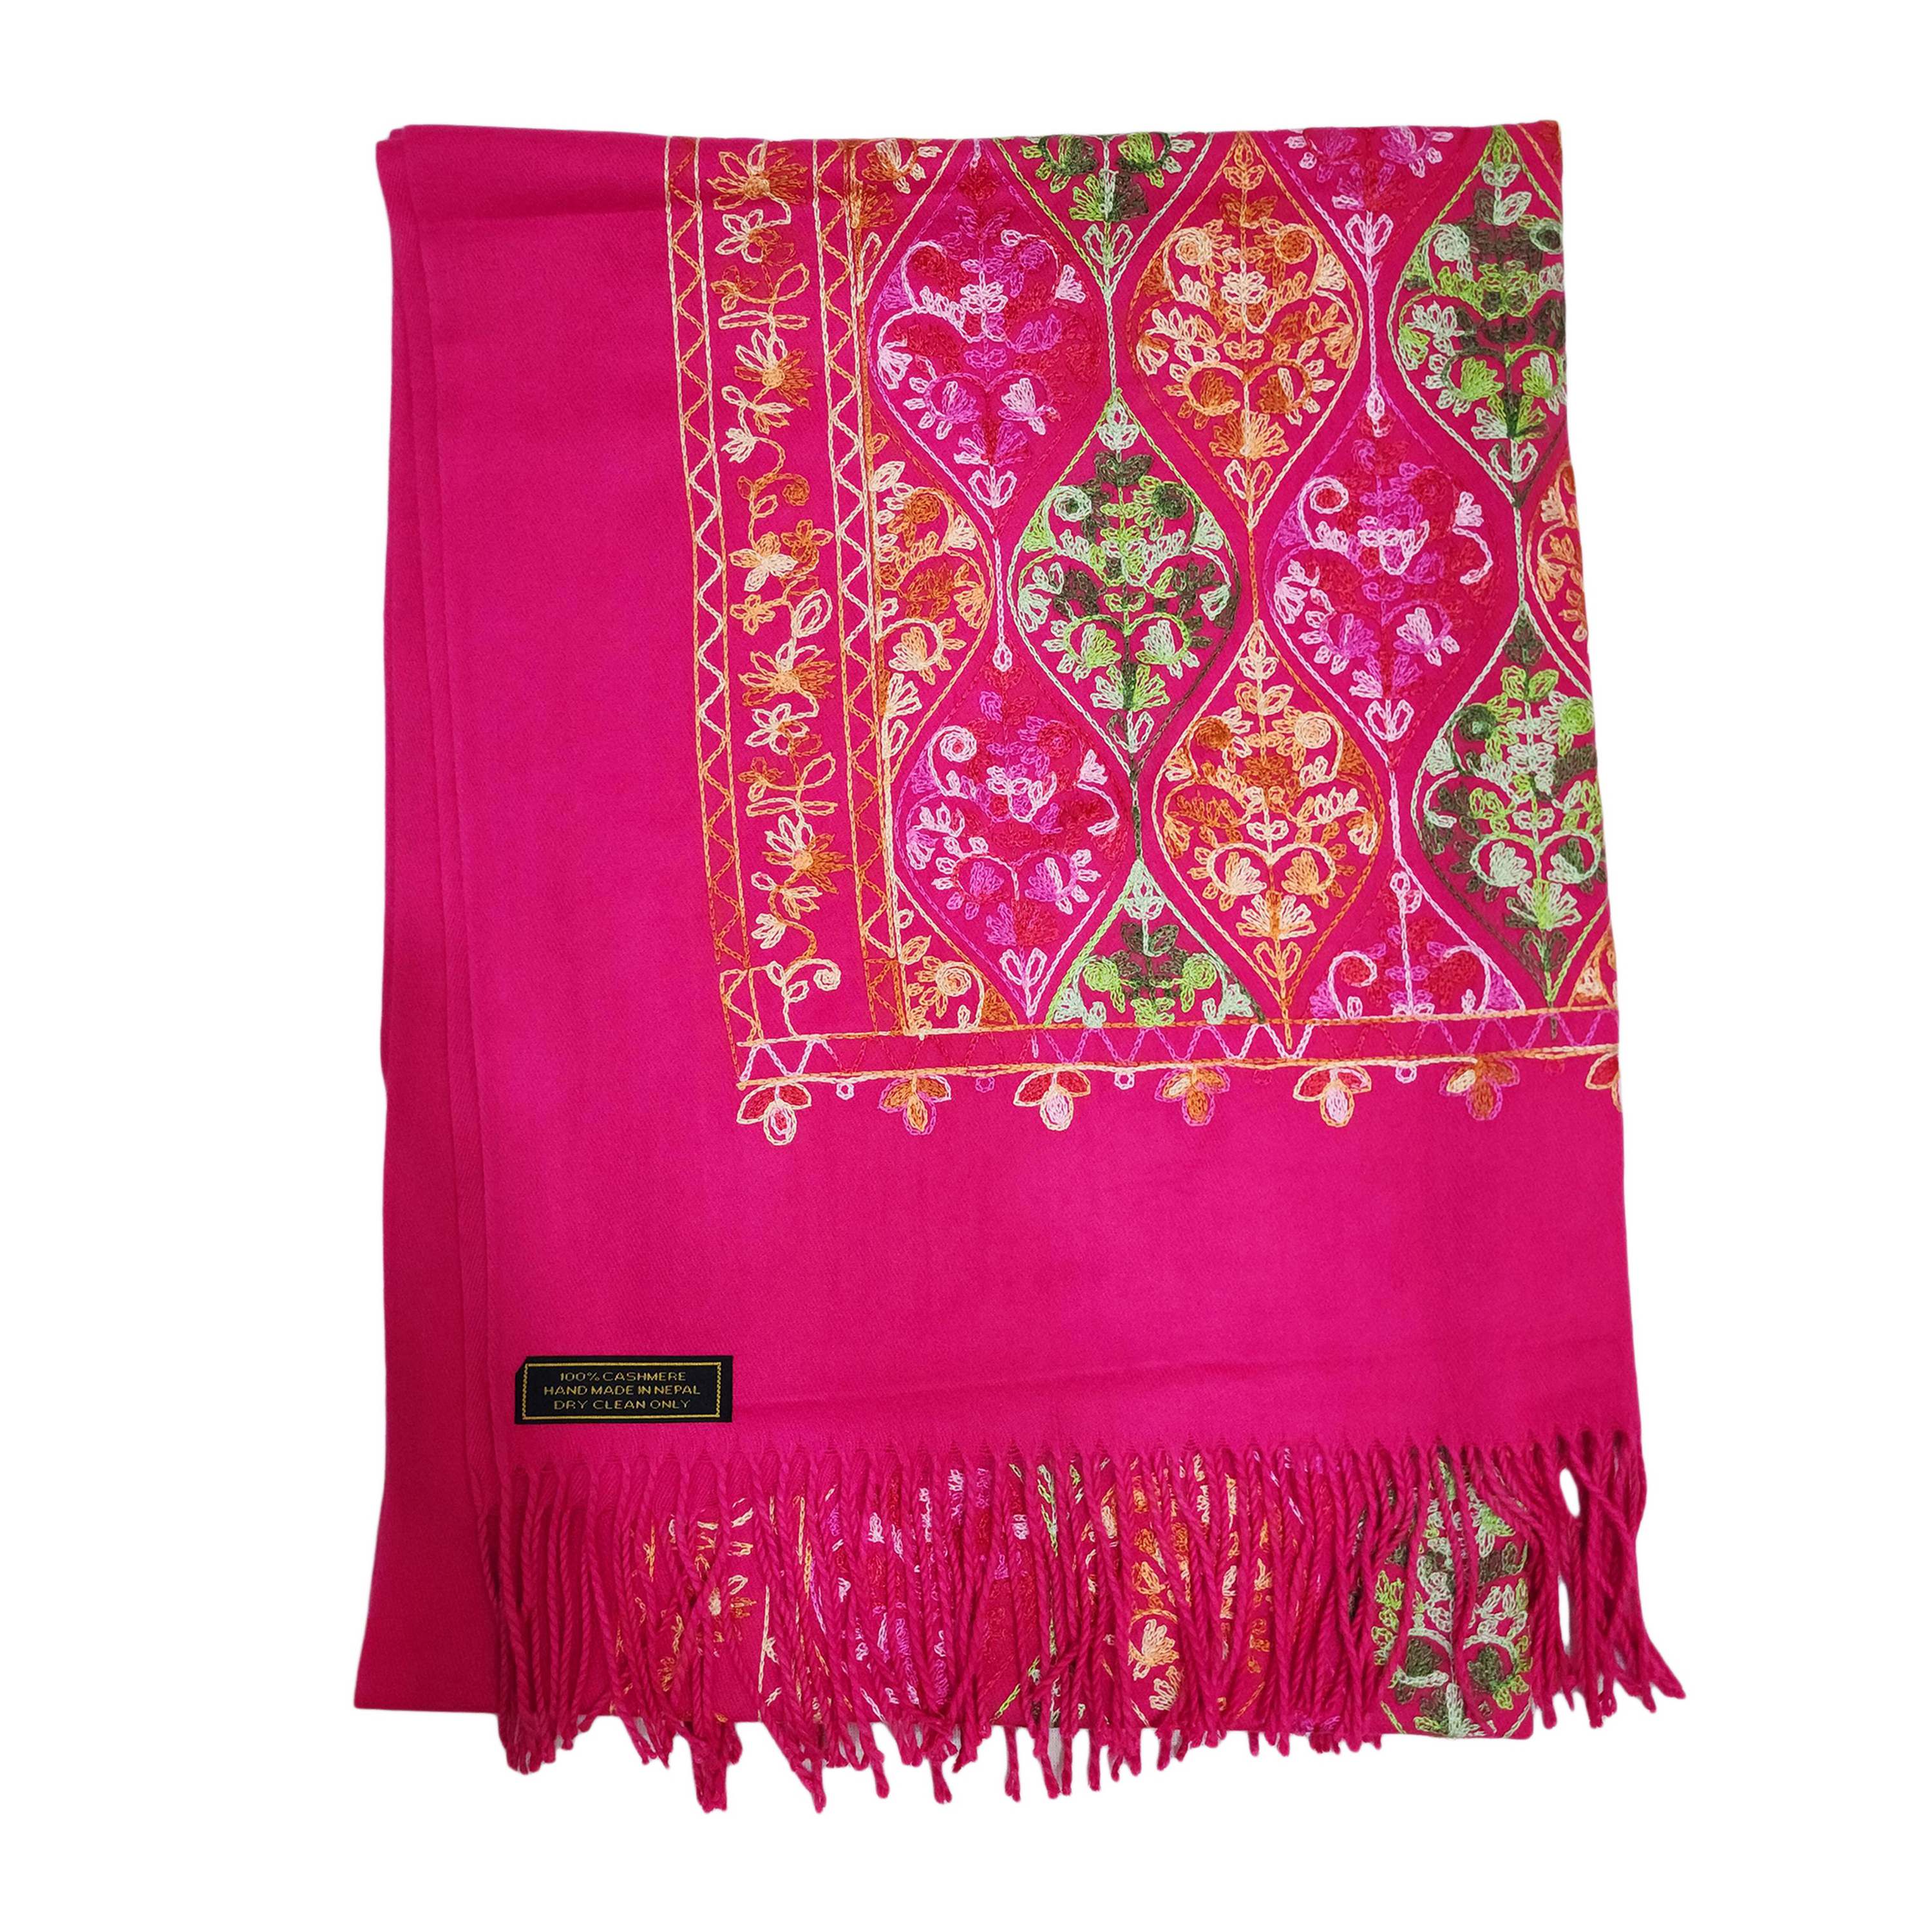 Desigener Shawl, Thick Nepali Shawl, With Heavy Embroidery, Color pink